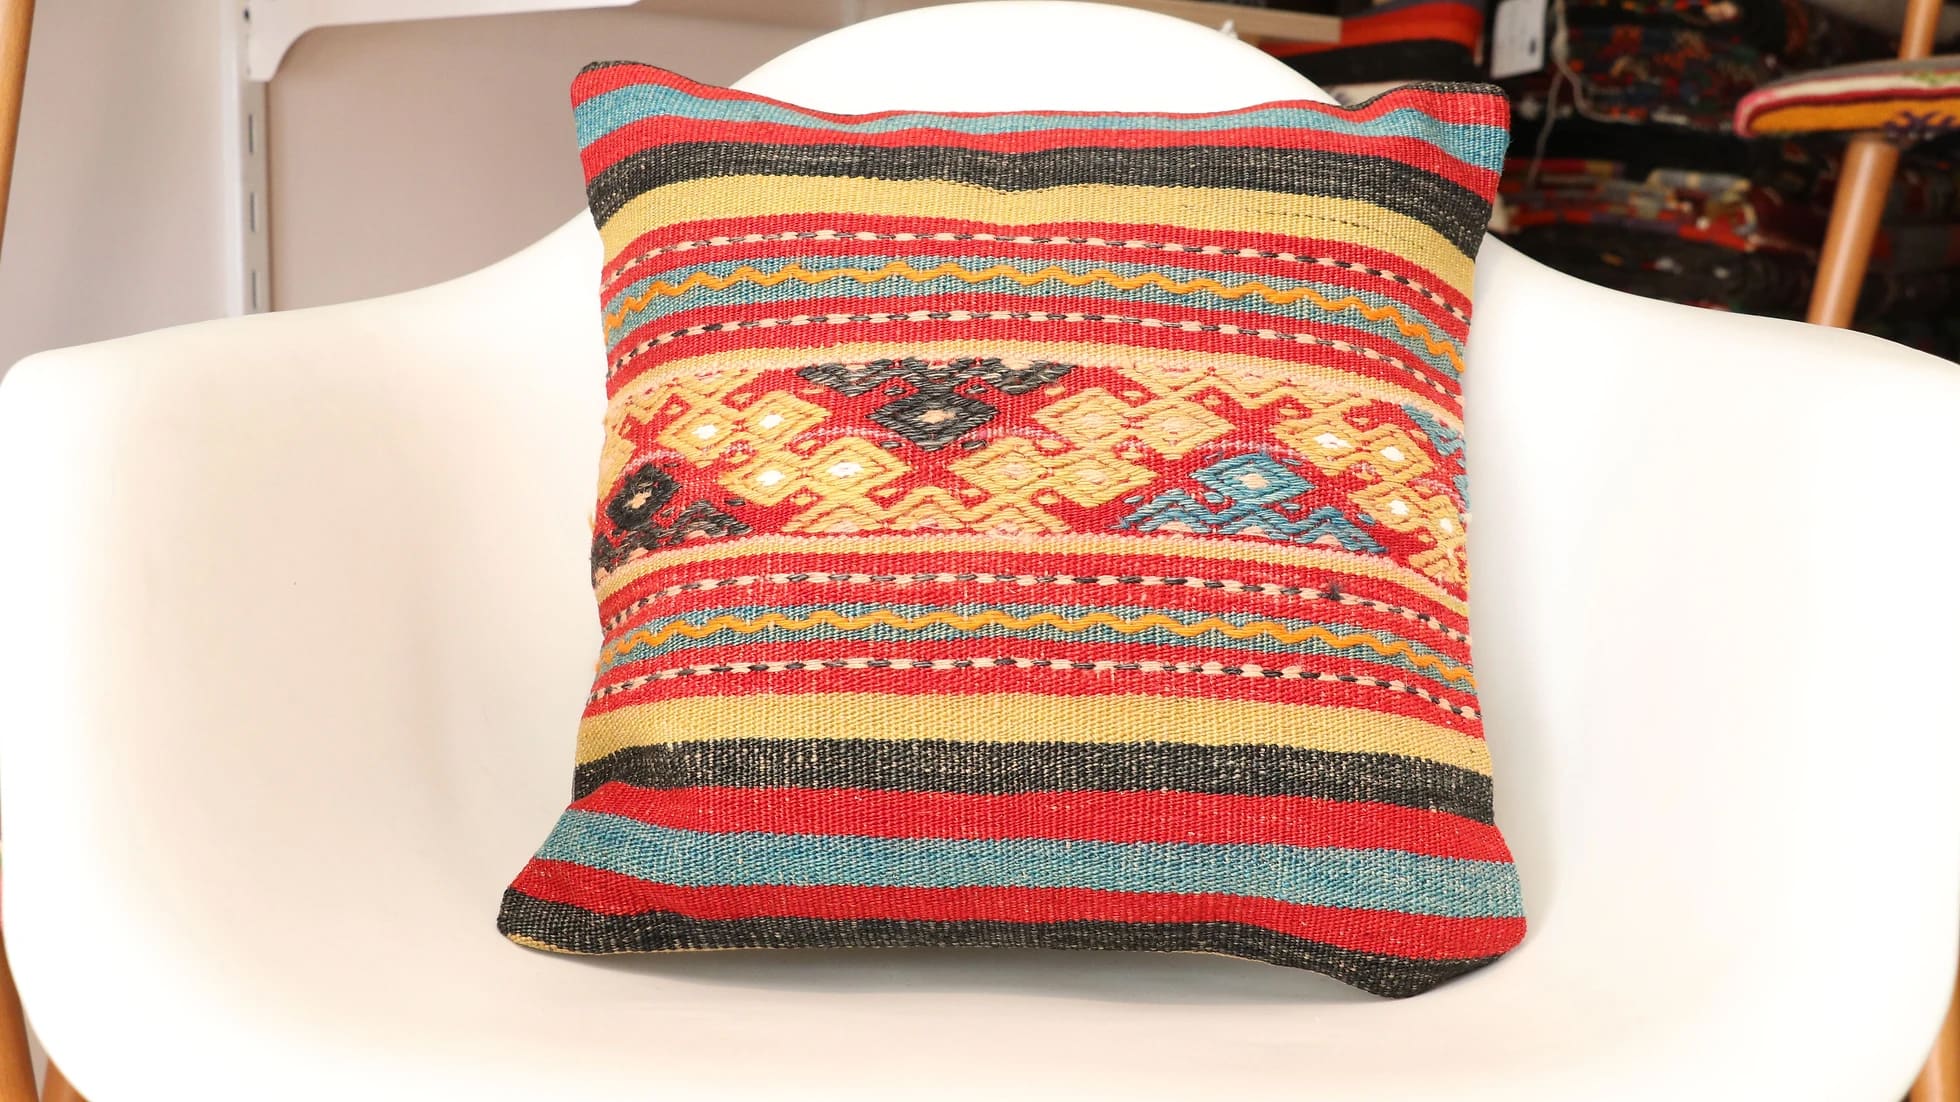 vintage turkish kilim upholstered throw pillow cover in geometric patterns and stripes by Kilim Couture New York